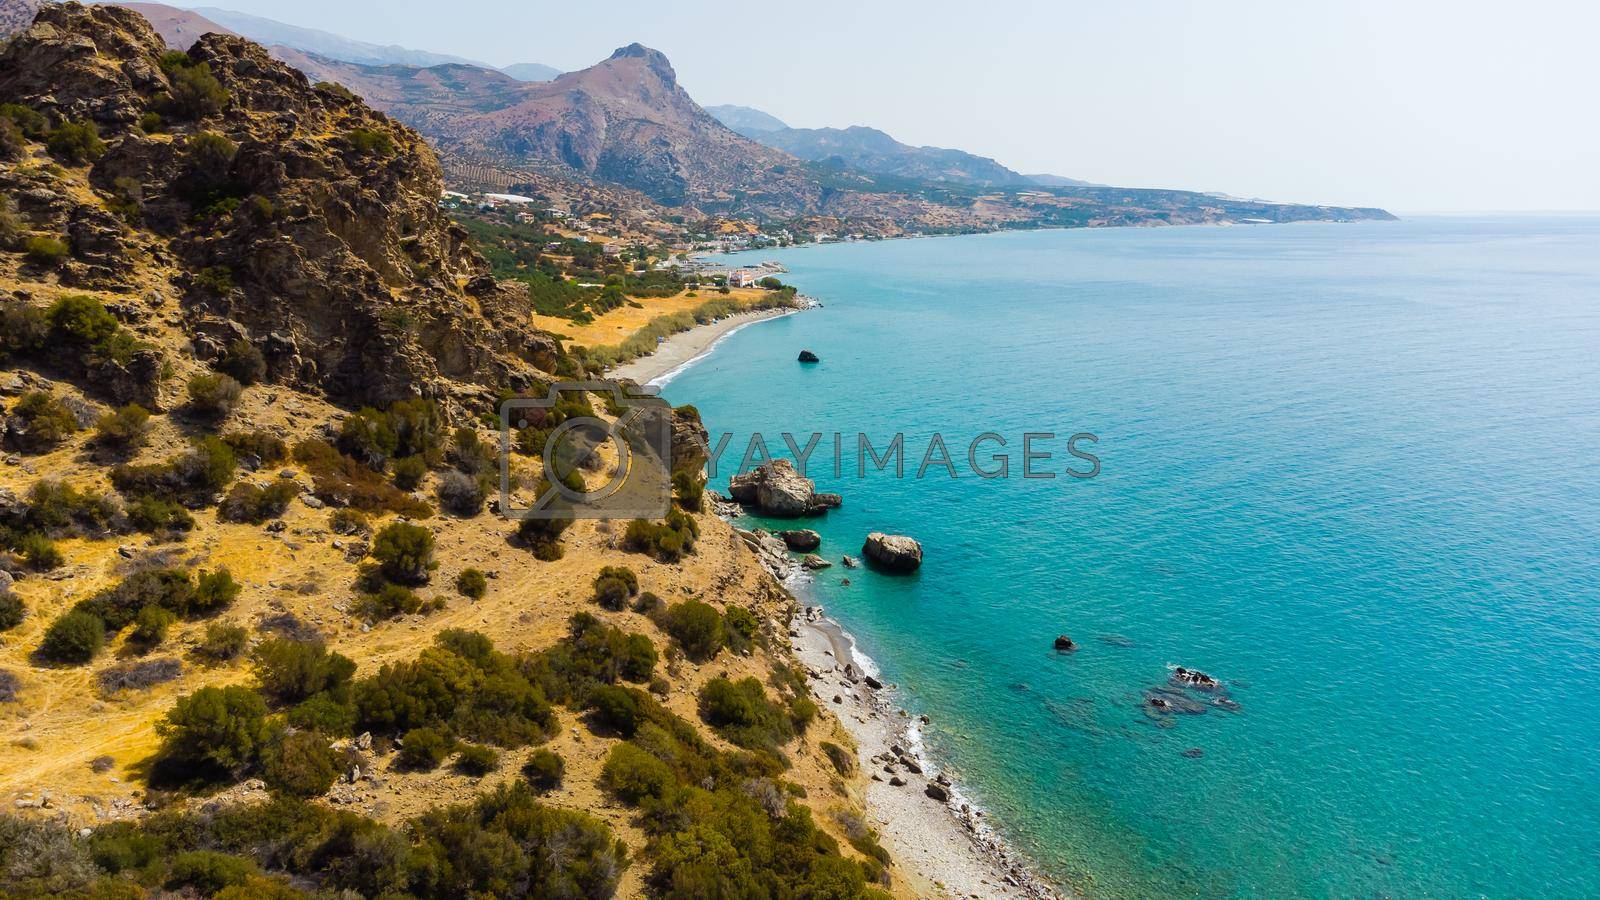 Greece, Crete, landscape with olive trees and tiny mountain village.